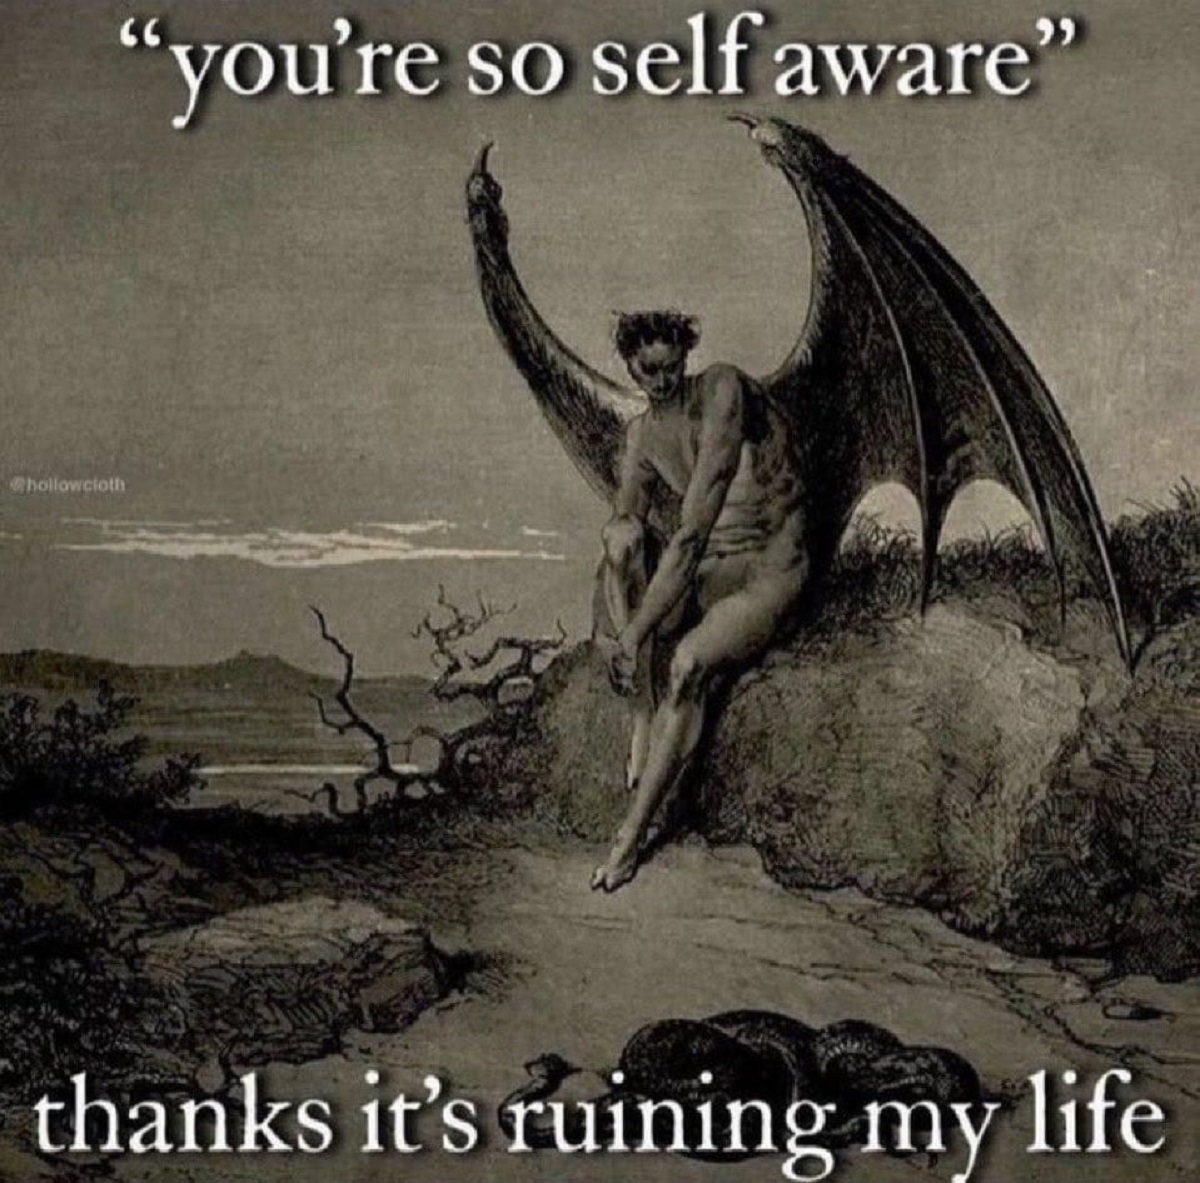 lucifer biblical - hollowcloth "you're so self aware" thanks it's ruining my life